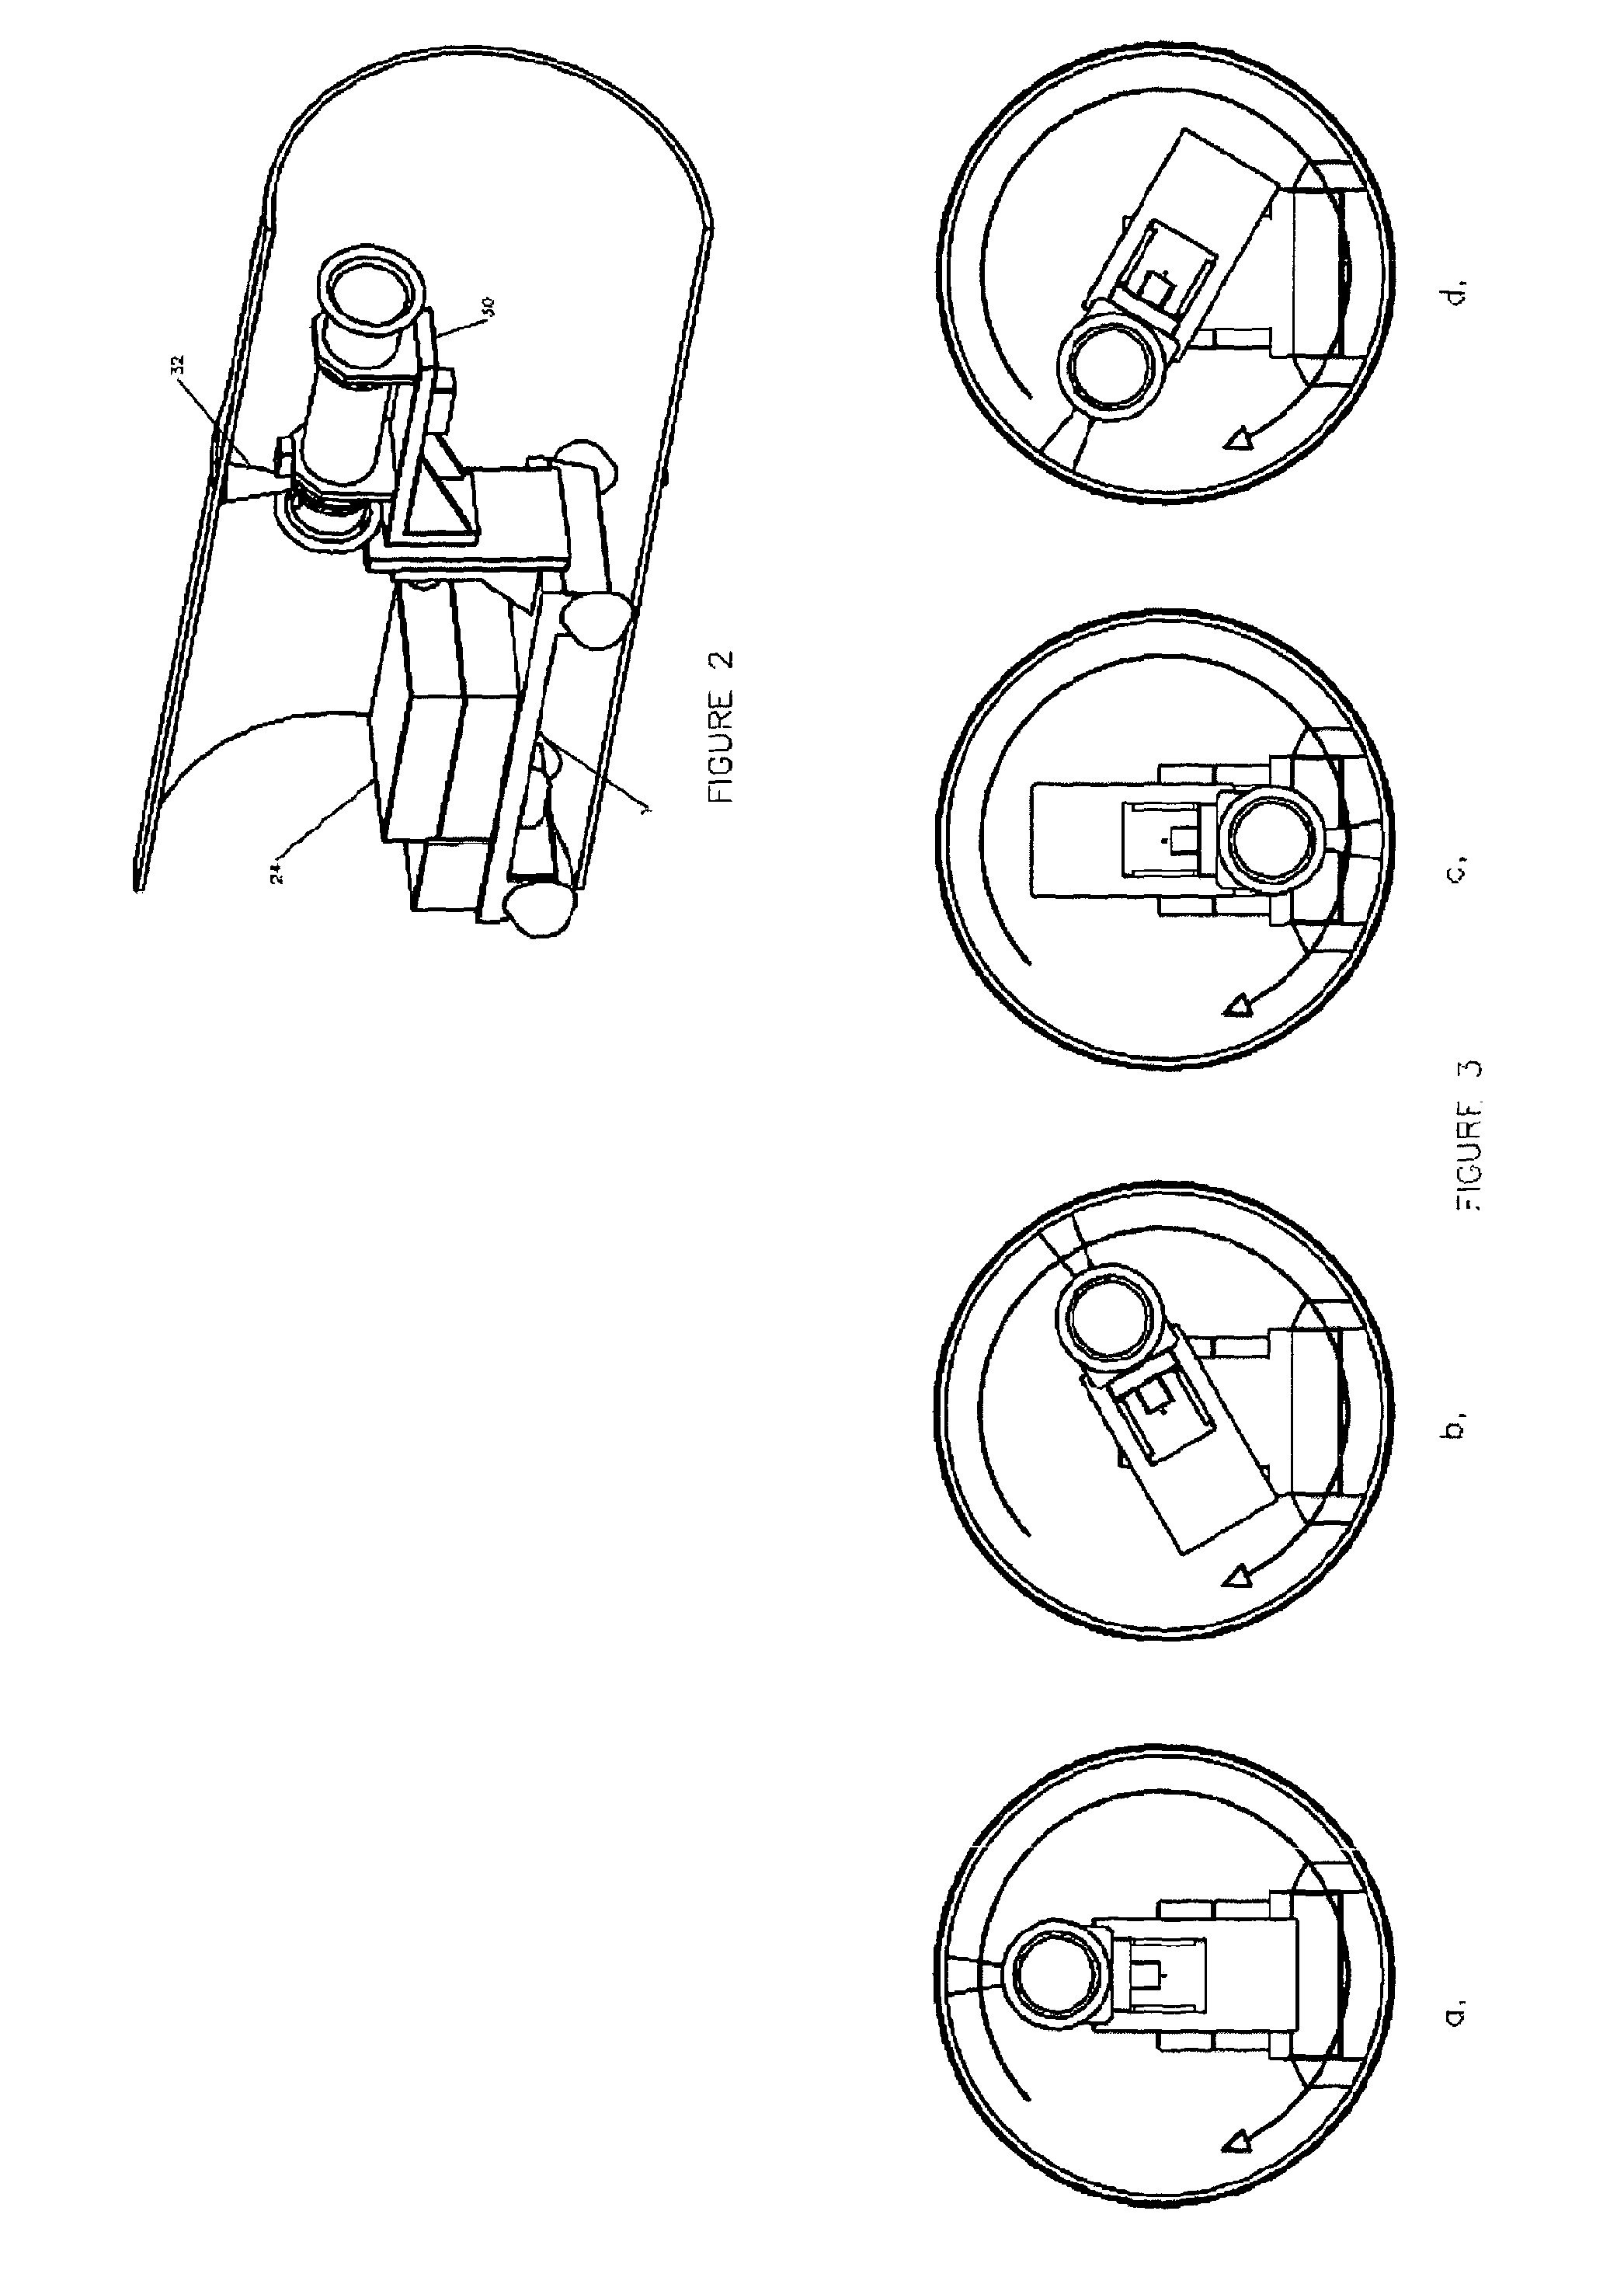 X-ray inspection apparatus for pipeline girth weld inspection